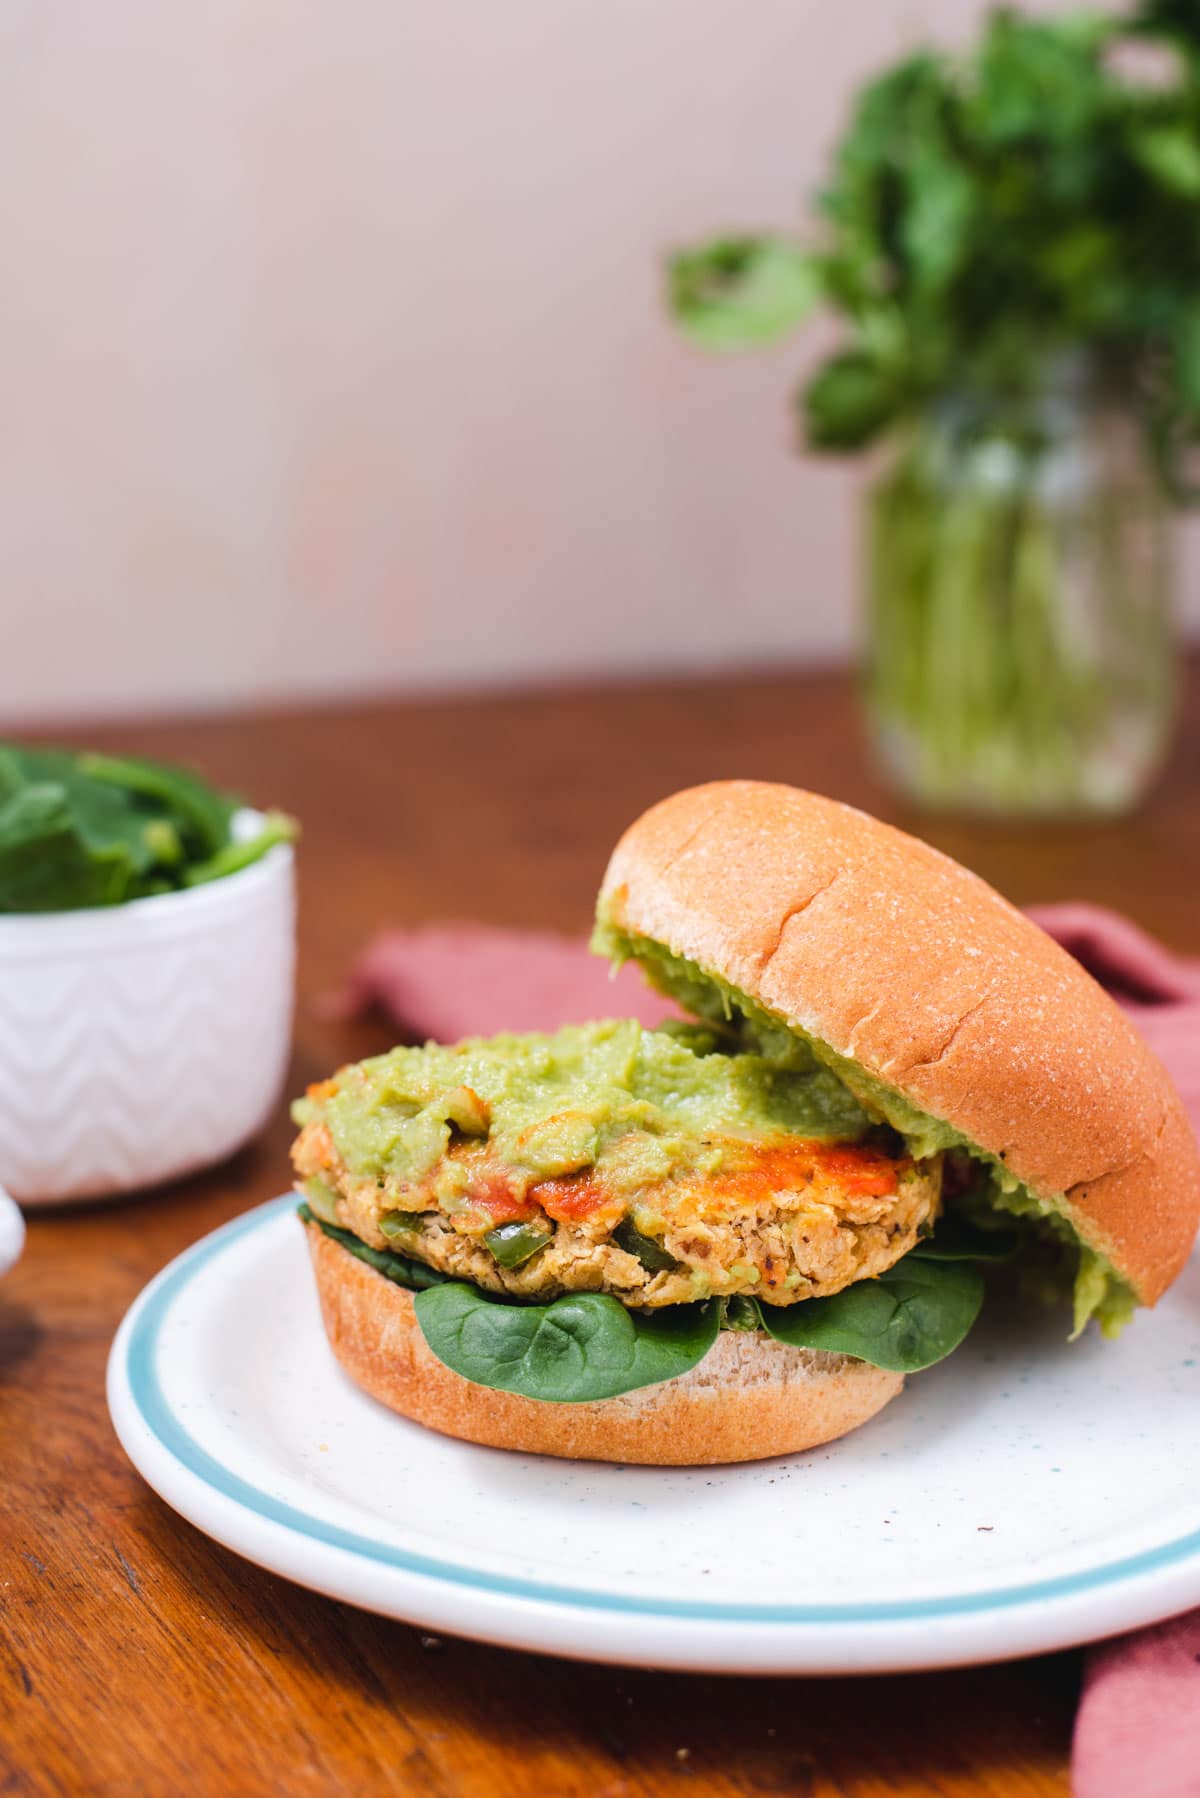 Veggie patty topped with guacamole on a bun